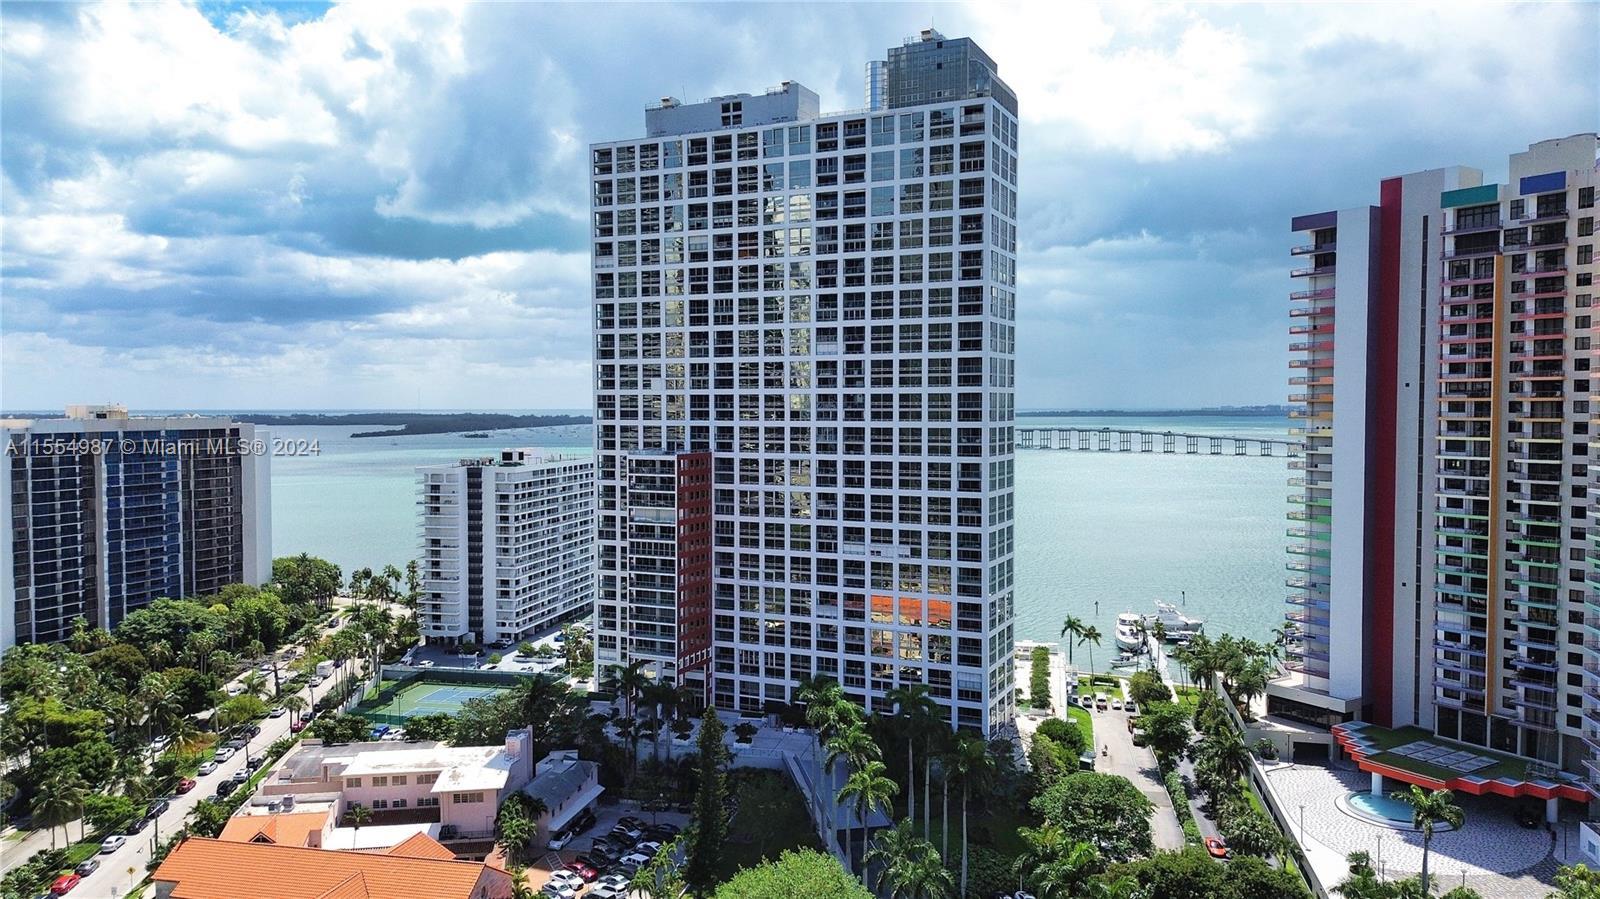 Discover the pinnacle of luxury living in Brickell, Miami's premier financial district. This exquisi